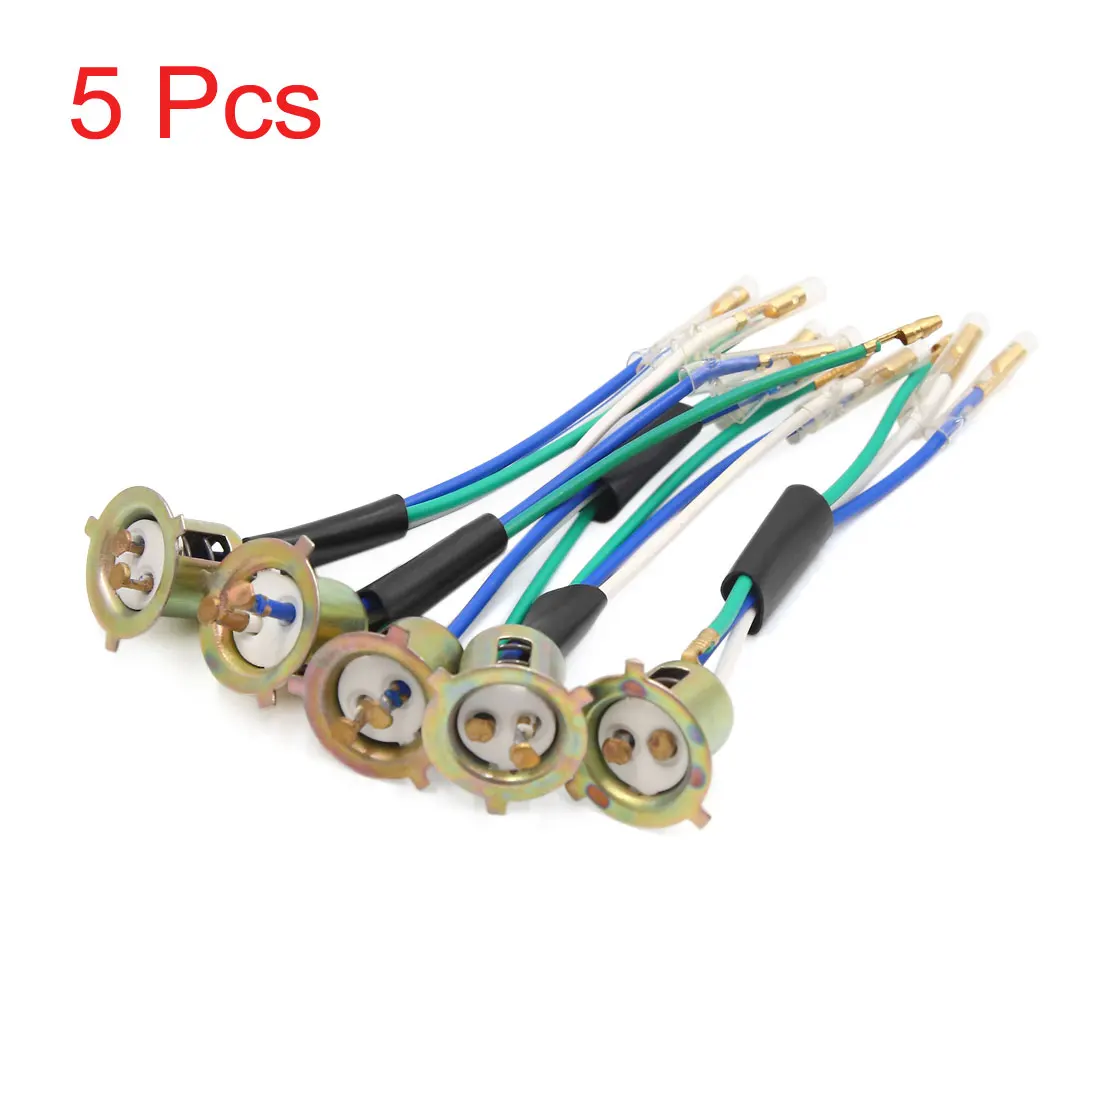 

Uxcell 5pcs 3 Wire Motorcycle Motorbike Headlight Bulb Socket Wires Harness Connector Wiring Sockets Replacement